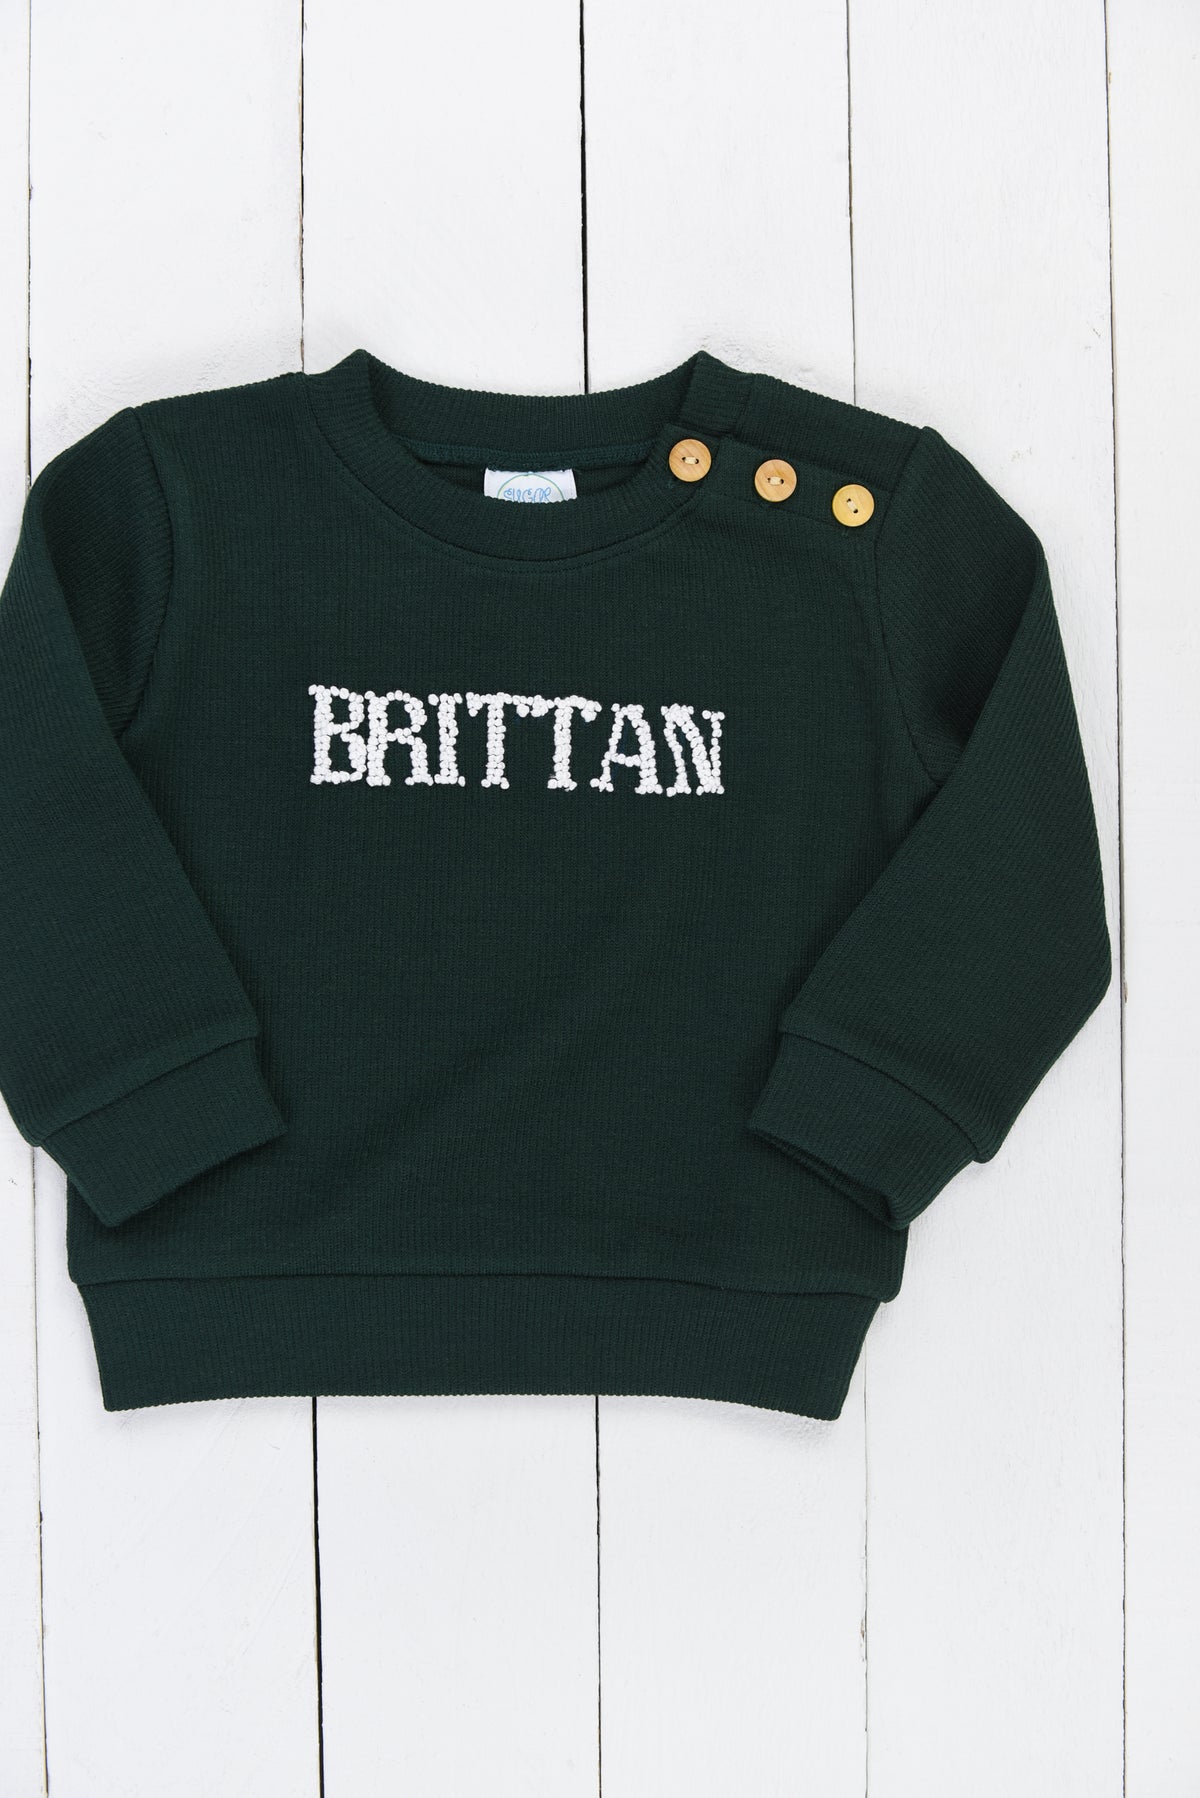 PO96: Green Frenchknot Name Sweater